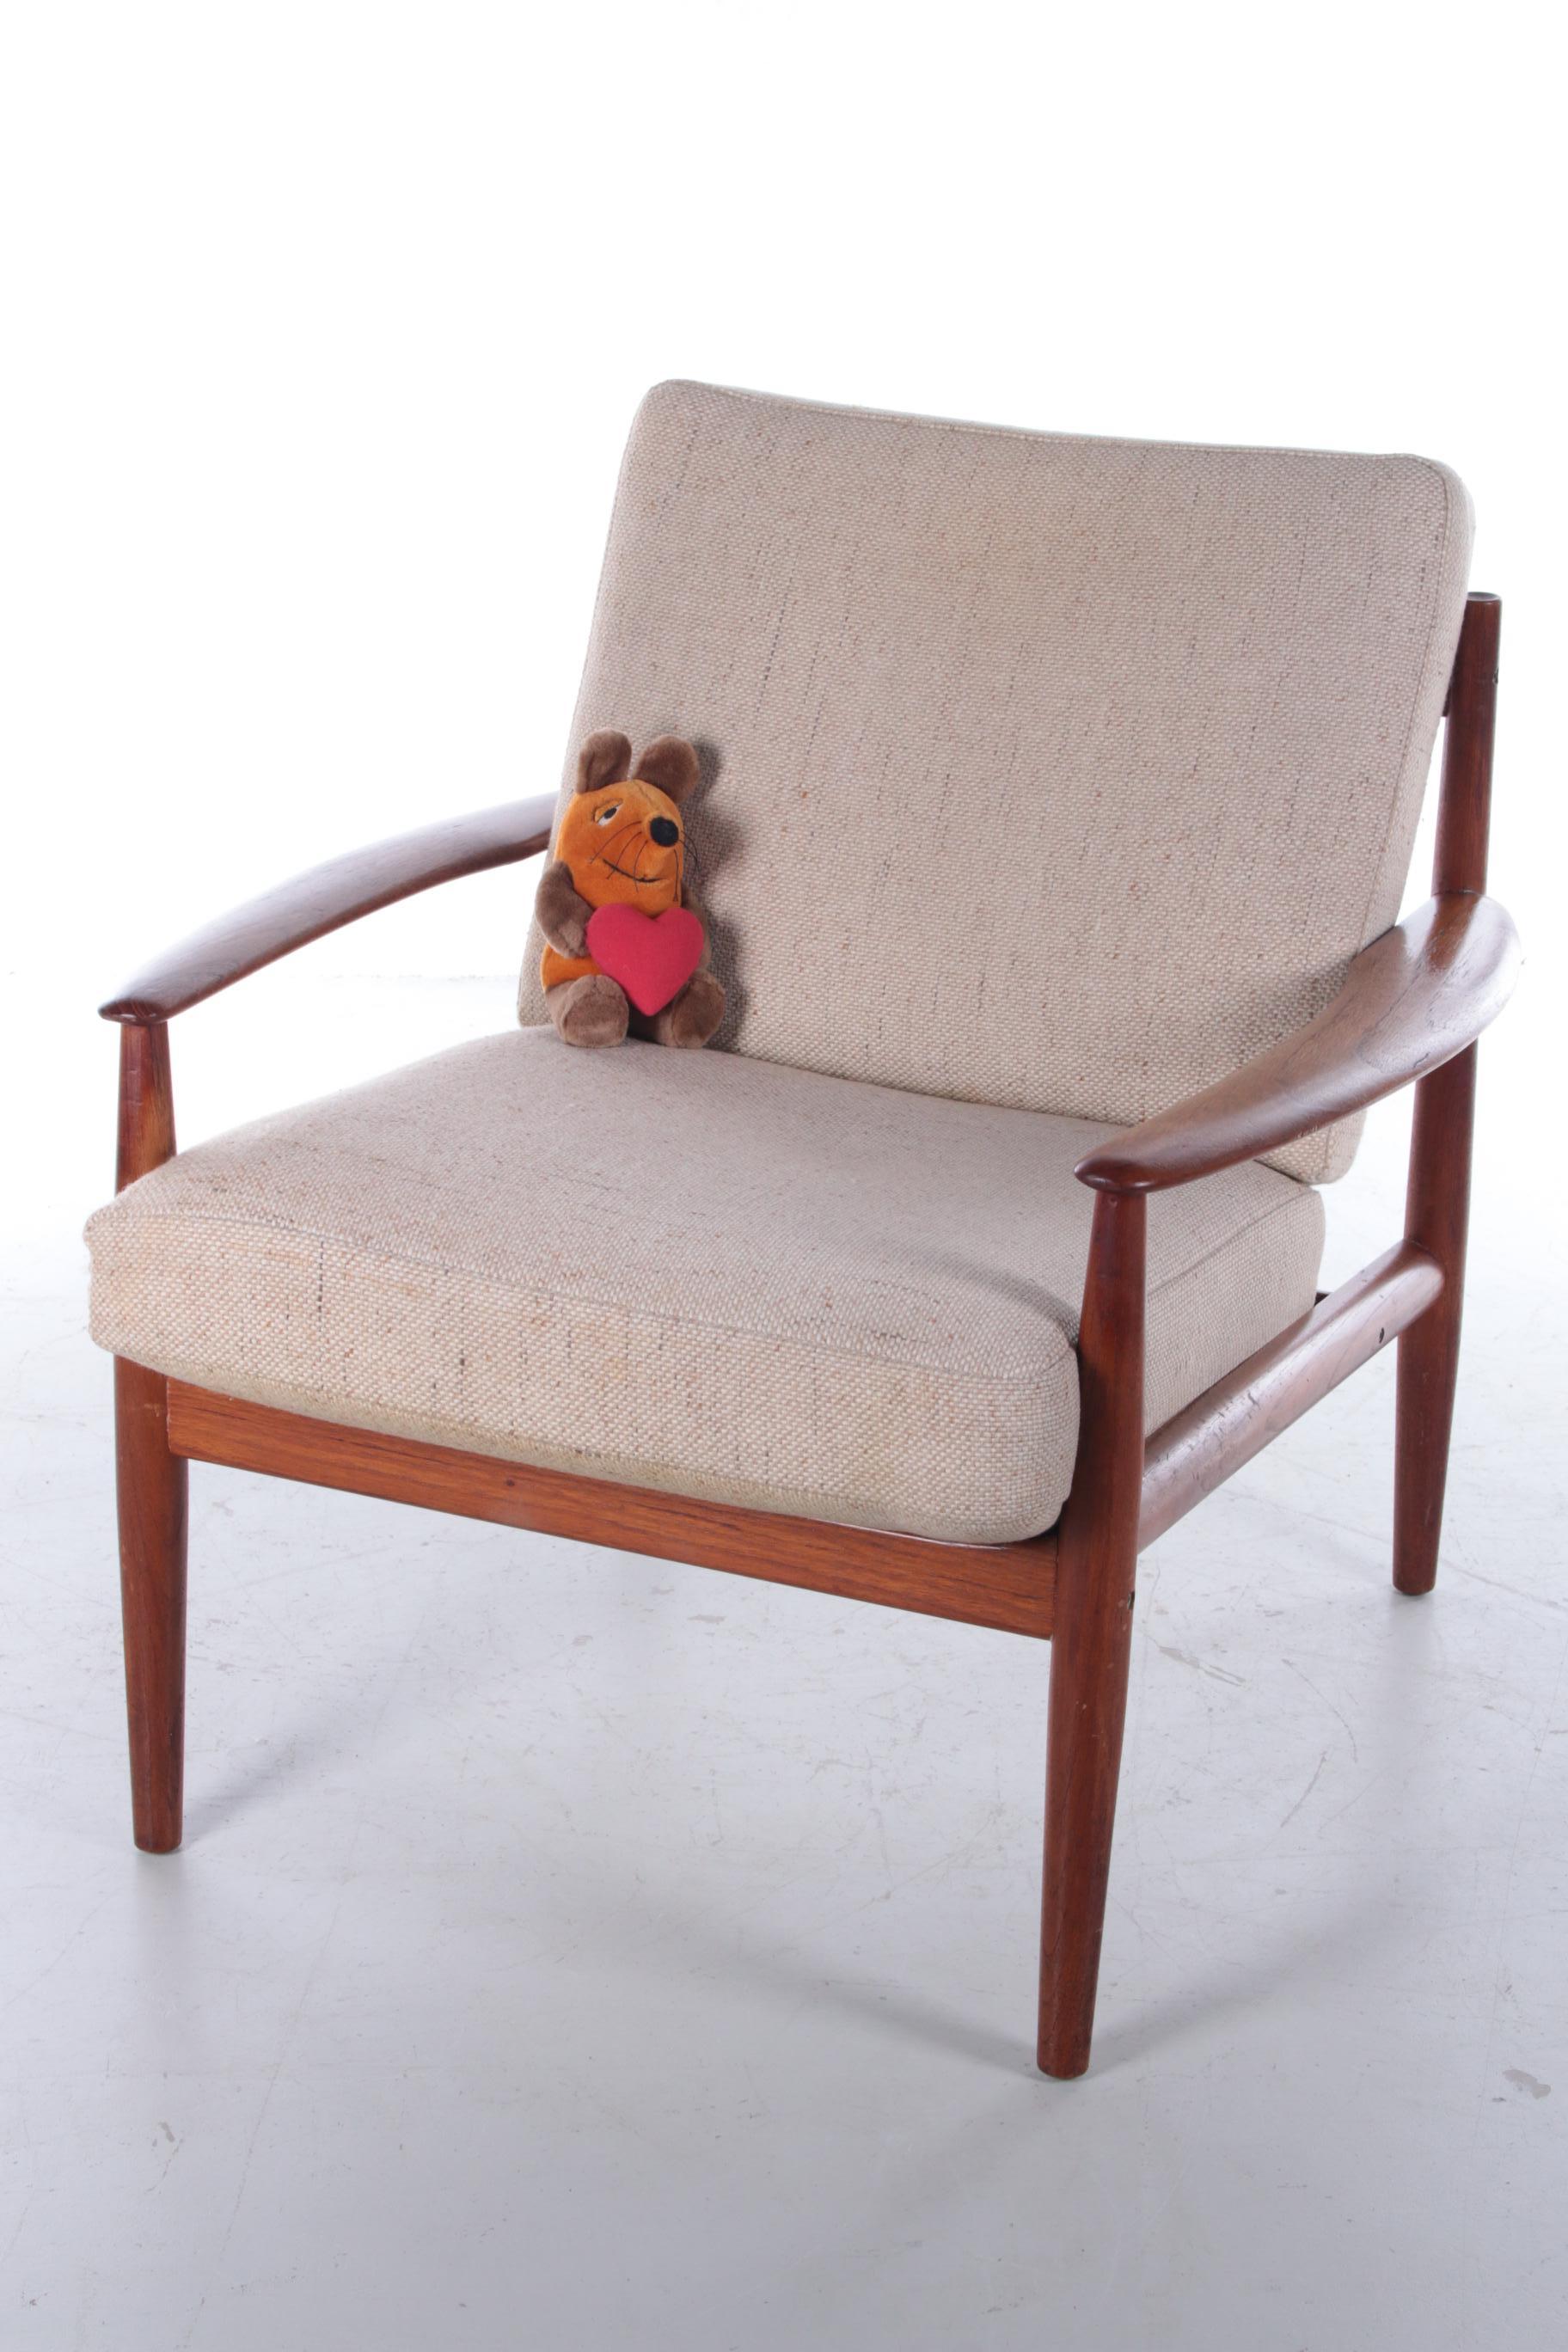 Original teak armchair design by Greta Jalk Model 118, Denmark.

Beautiful vintage teak wooden model 118 armchair. The armchair was designed by the Danish designer Grete Jalk and produced by France and Son. The frame is made of solid teak and has